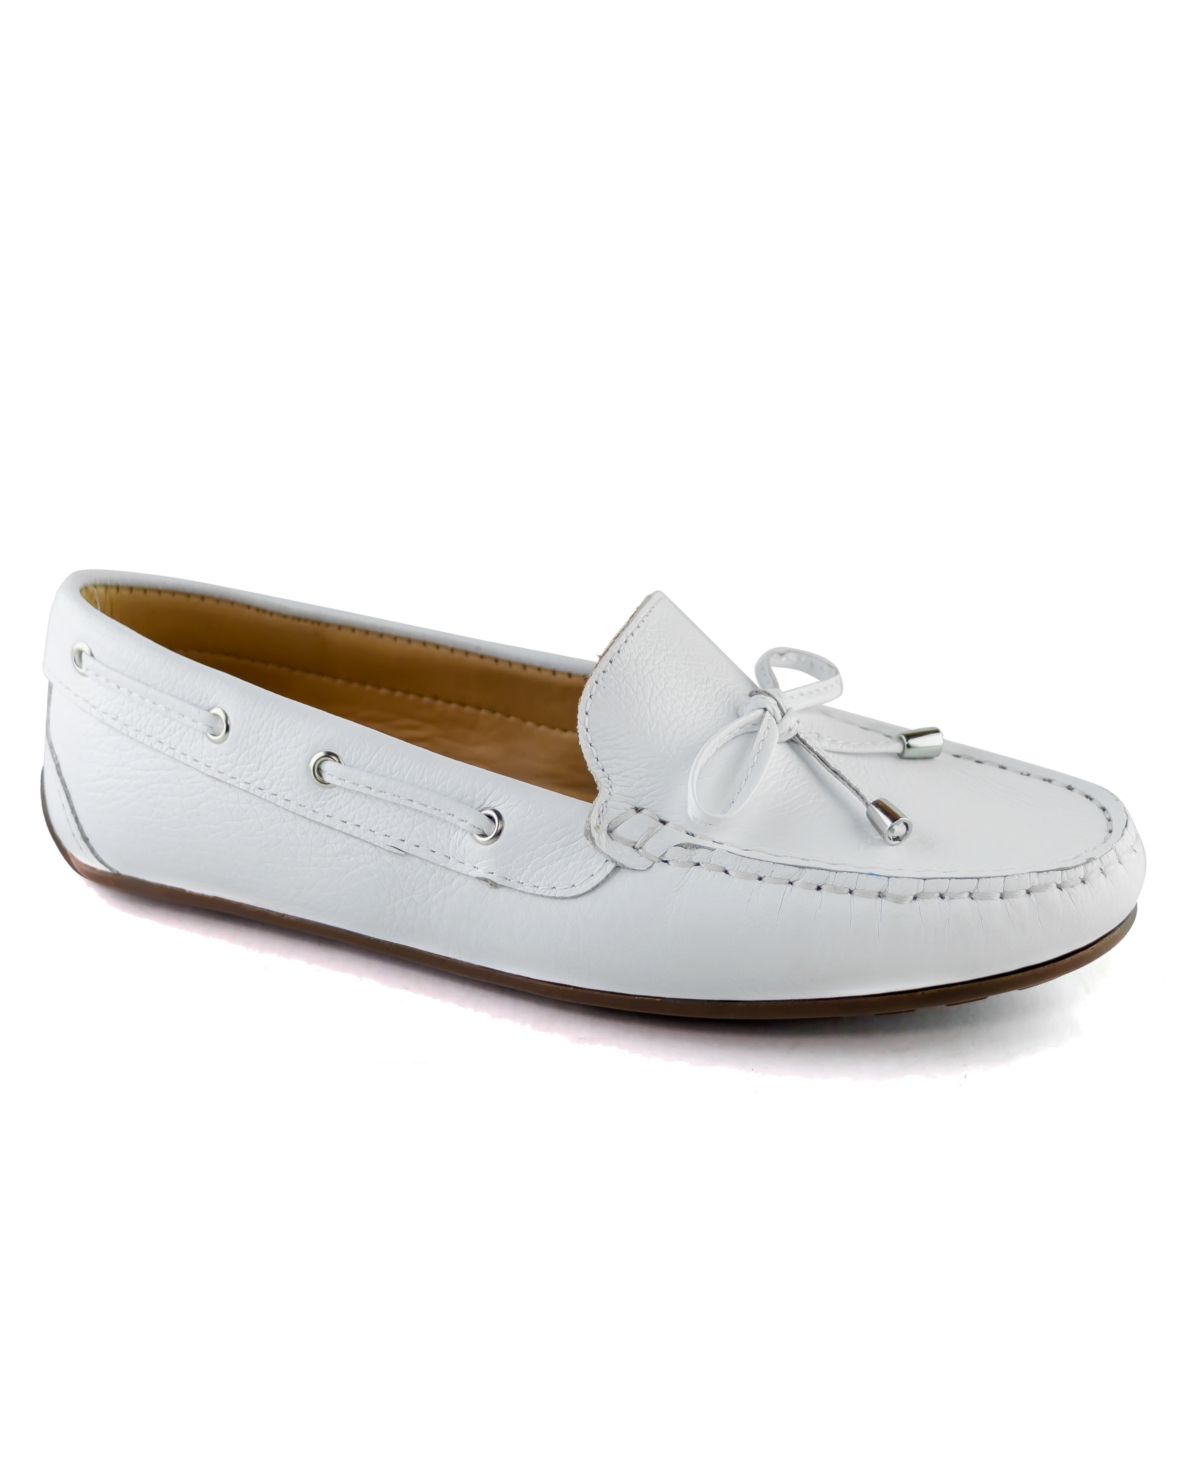 Women's Riverview Comfort Loafers - White Grainy